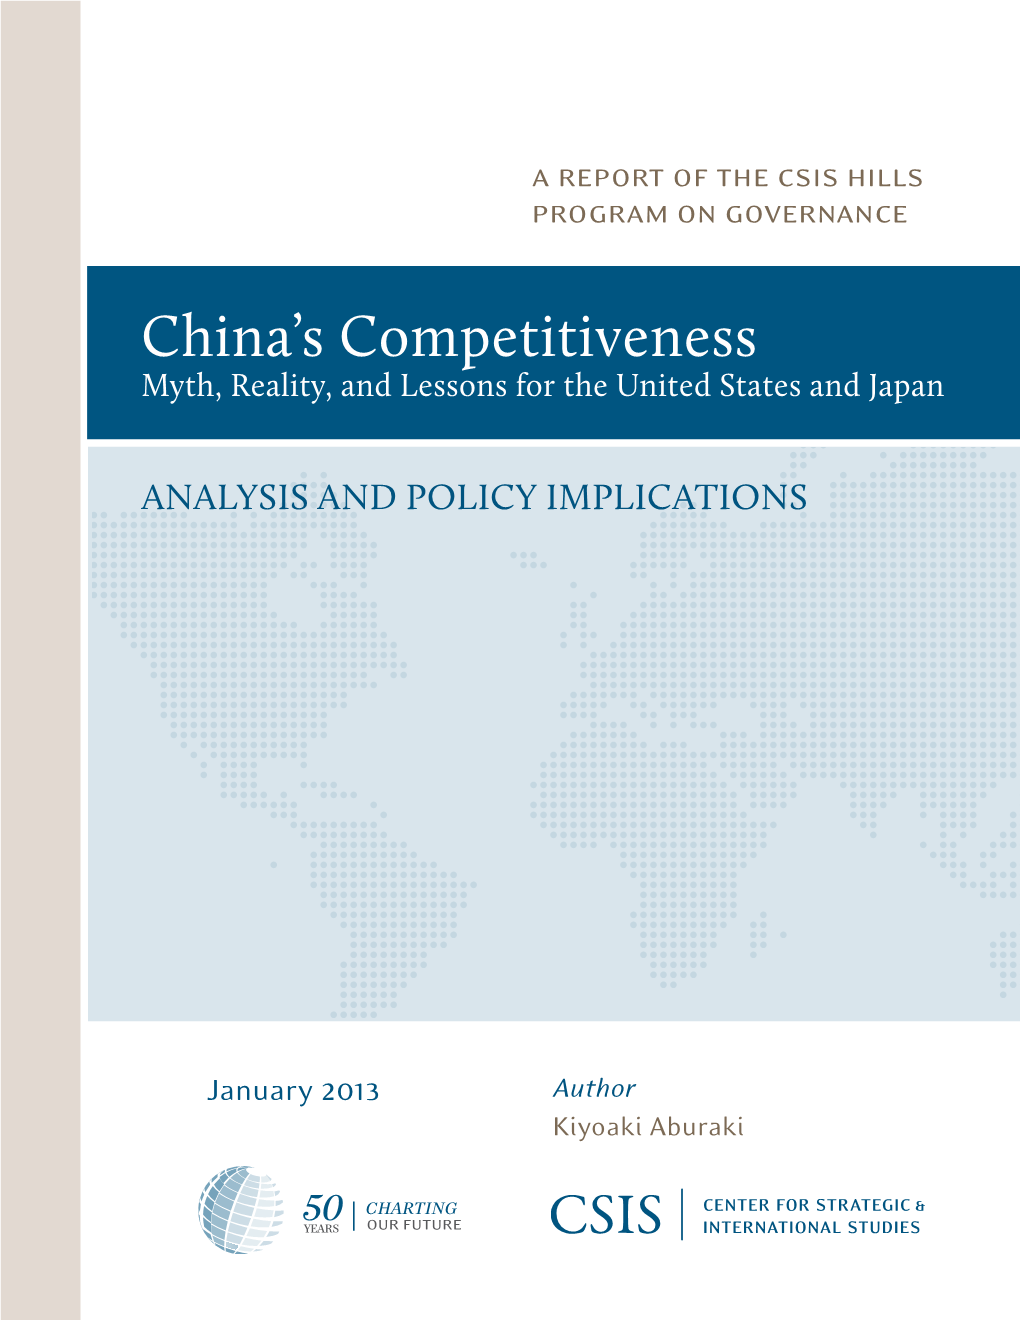 China's Competitiveness: Analysis and Policy Implications